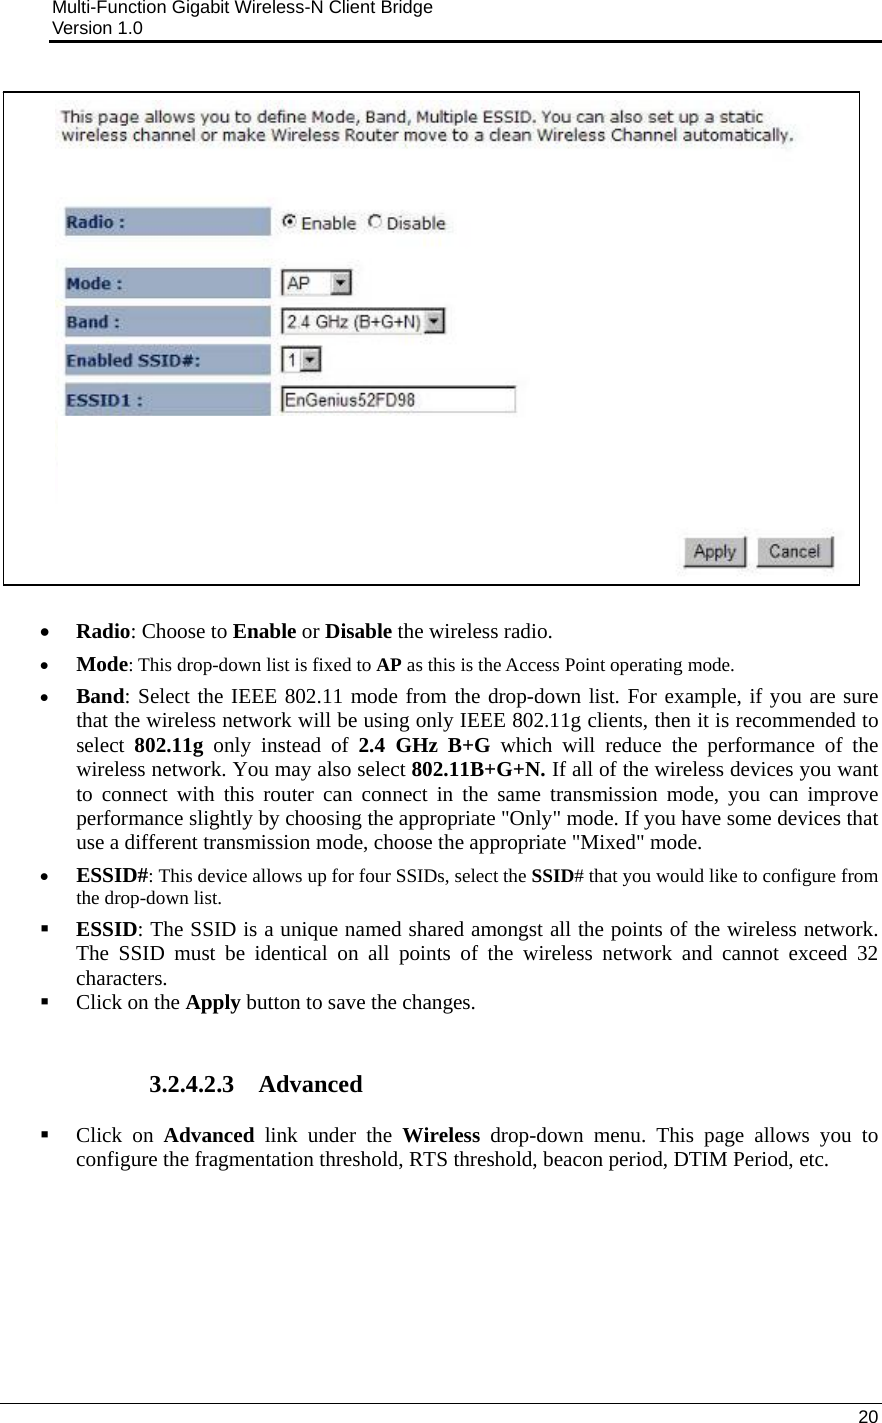 Multi-Function Gigabit Wireless-N Client Bridge                                         Version 1.0    20   • Radio: Choose to Enable or Disable the wireless radio.  • Mode: This drop-down list is fixed to AP as this is the Access Point operating mode. • Band: Select the IEEE 802.11 mode from the drop-down list. For example, if you are sure that the wireless network will be using only IEEE 802.11g clients, then it is recommended to select  802.11g only instead of 2.4 GHz B+G which will reduce the performance of the wireless network. You may also select 802.11B+G+N. If all of the wireless devices you want to connect with this router can connect in the same transmission mode, you can improve performance slightly by choosing the appropriate &quot;Only&quot; mode. If you have some devices that use a different transmission mode, choose the appropriate &quot;Mixed&quot; mode.  • ESSID#: This device allows up for four SSIDs, select the SSID# that you would like to configure from the drop-down list.   ESSID: The SSID is a unique named shared amongst all the points of the wireless network. The SSID must be identical on all points of the wireless network and cannot exceed 32 characters.     Click on the Apply button to save the changes.    3.2.4.2.3 Advanced  Click on Advanced link under the Wireless drop-down menu. This page allows you to configure the fragmentation threshold, RTS threshold, beacon period, DTIM Period, etc.   